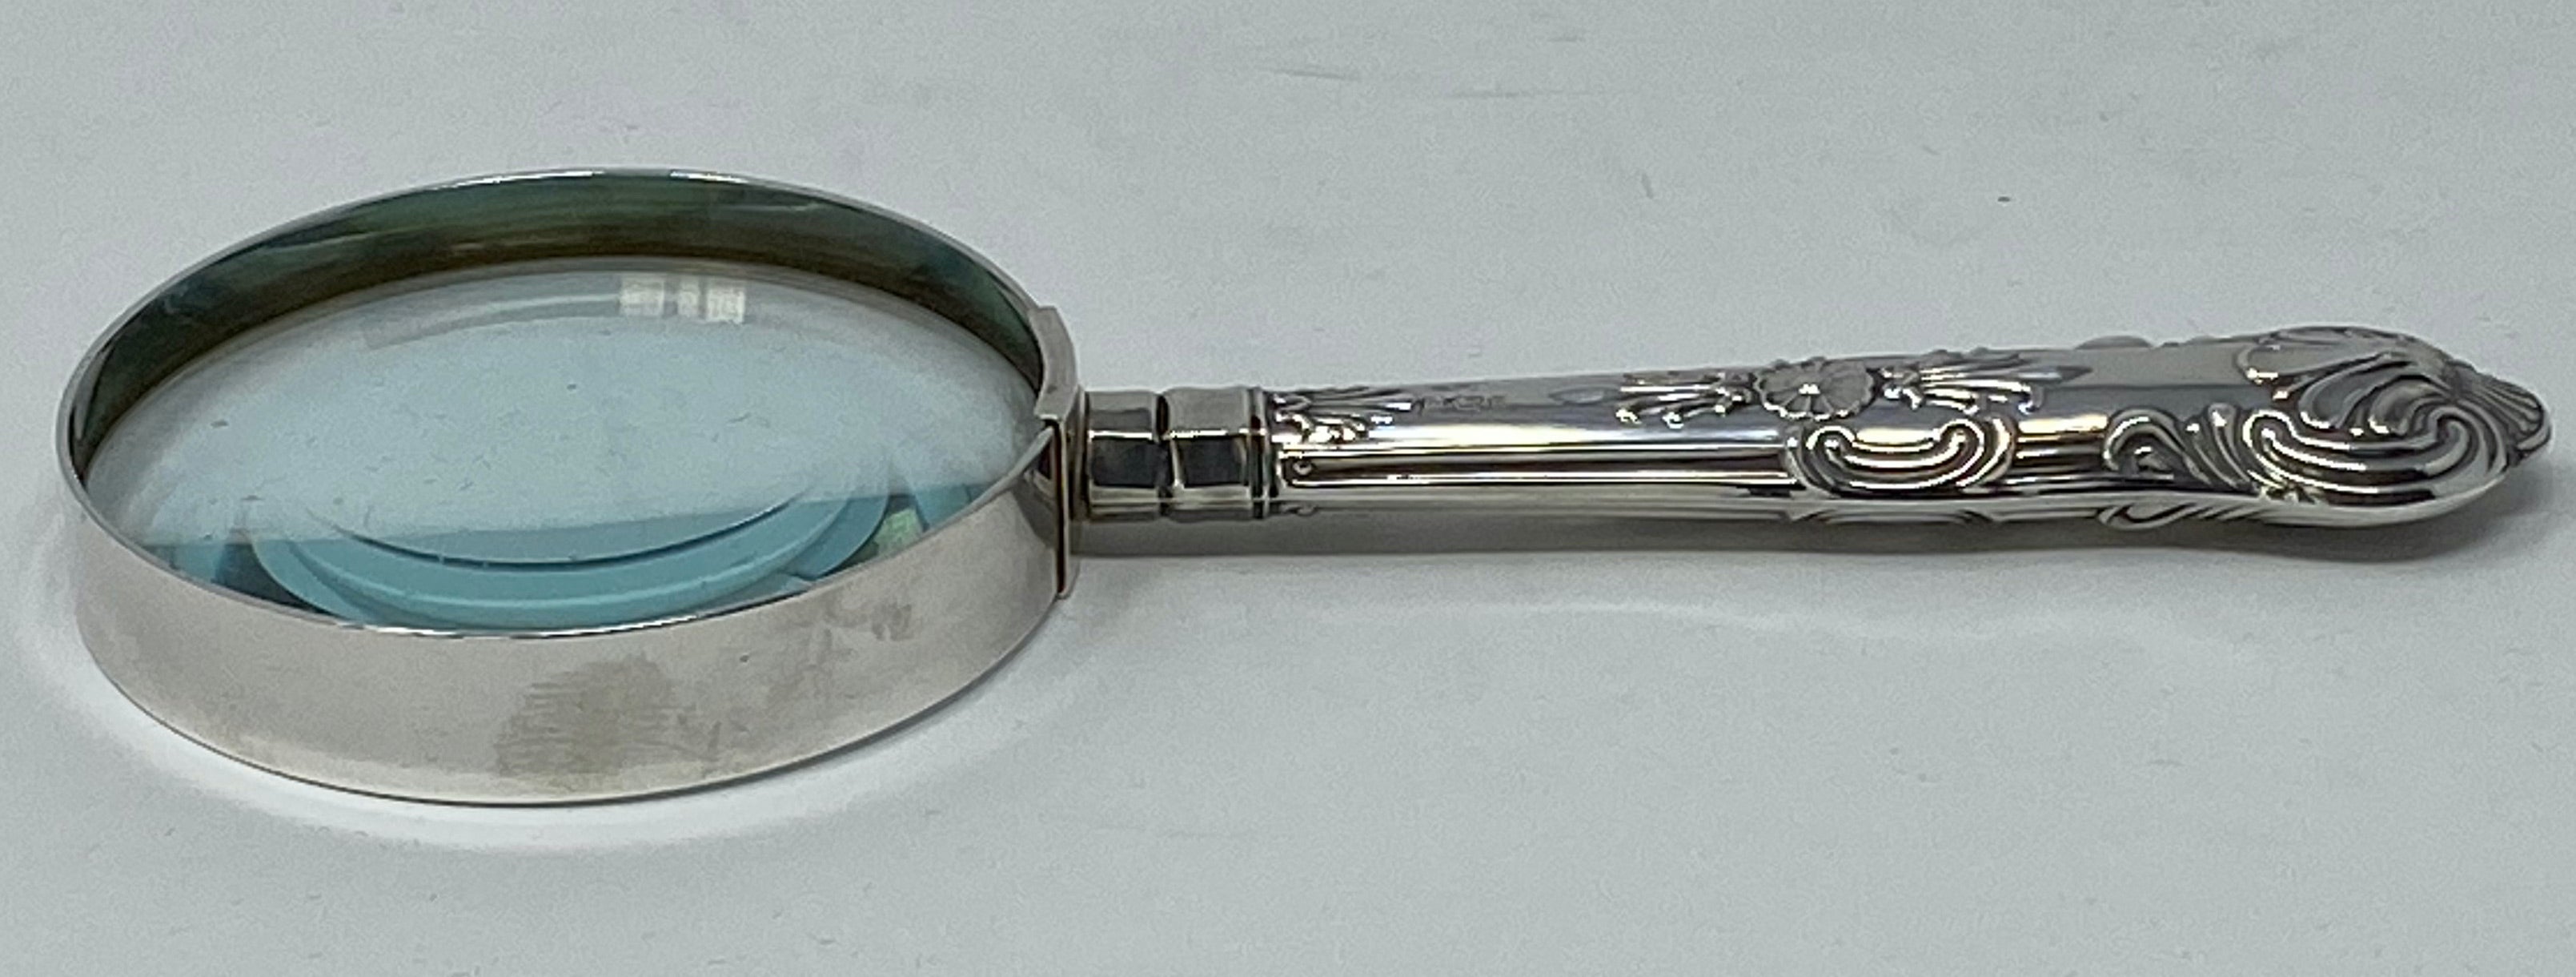 Silver Handled Magnifying Glass